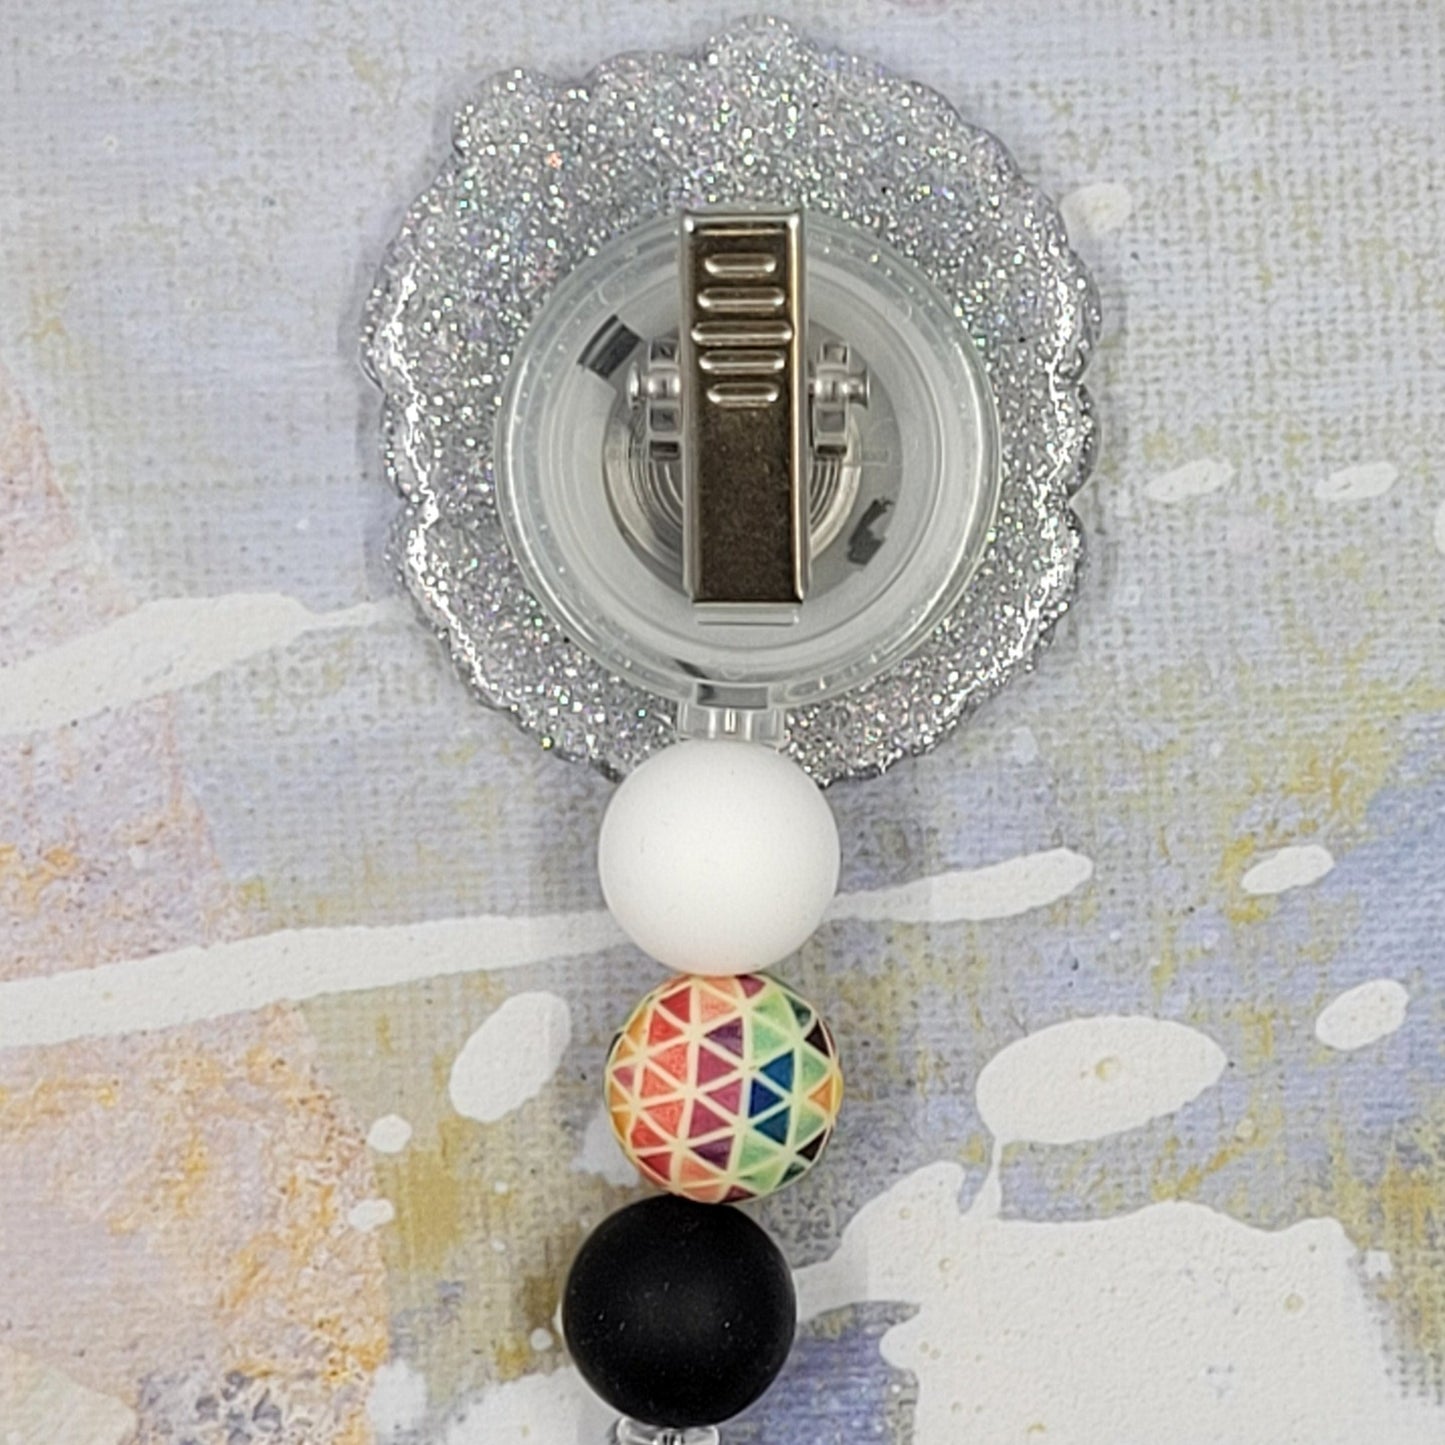 This badge reel, featuring the phrase "Accept Love Understand", aims to promote inclusivity across all backgrounds. It has a clear base with a glitter finish and is adorned with three coordinating silicone beads